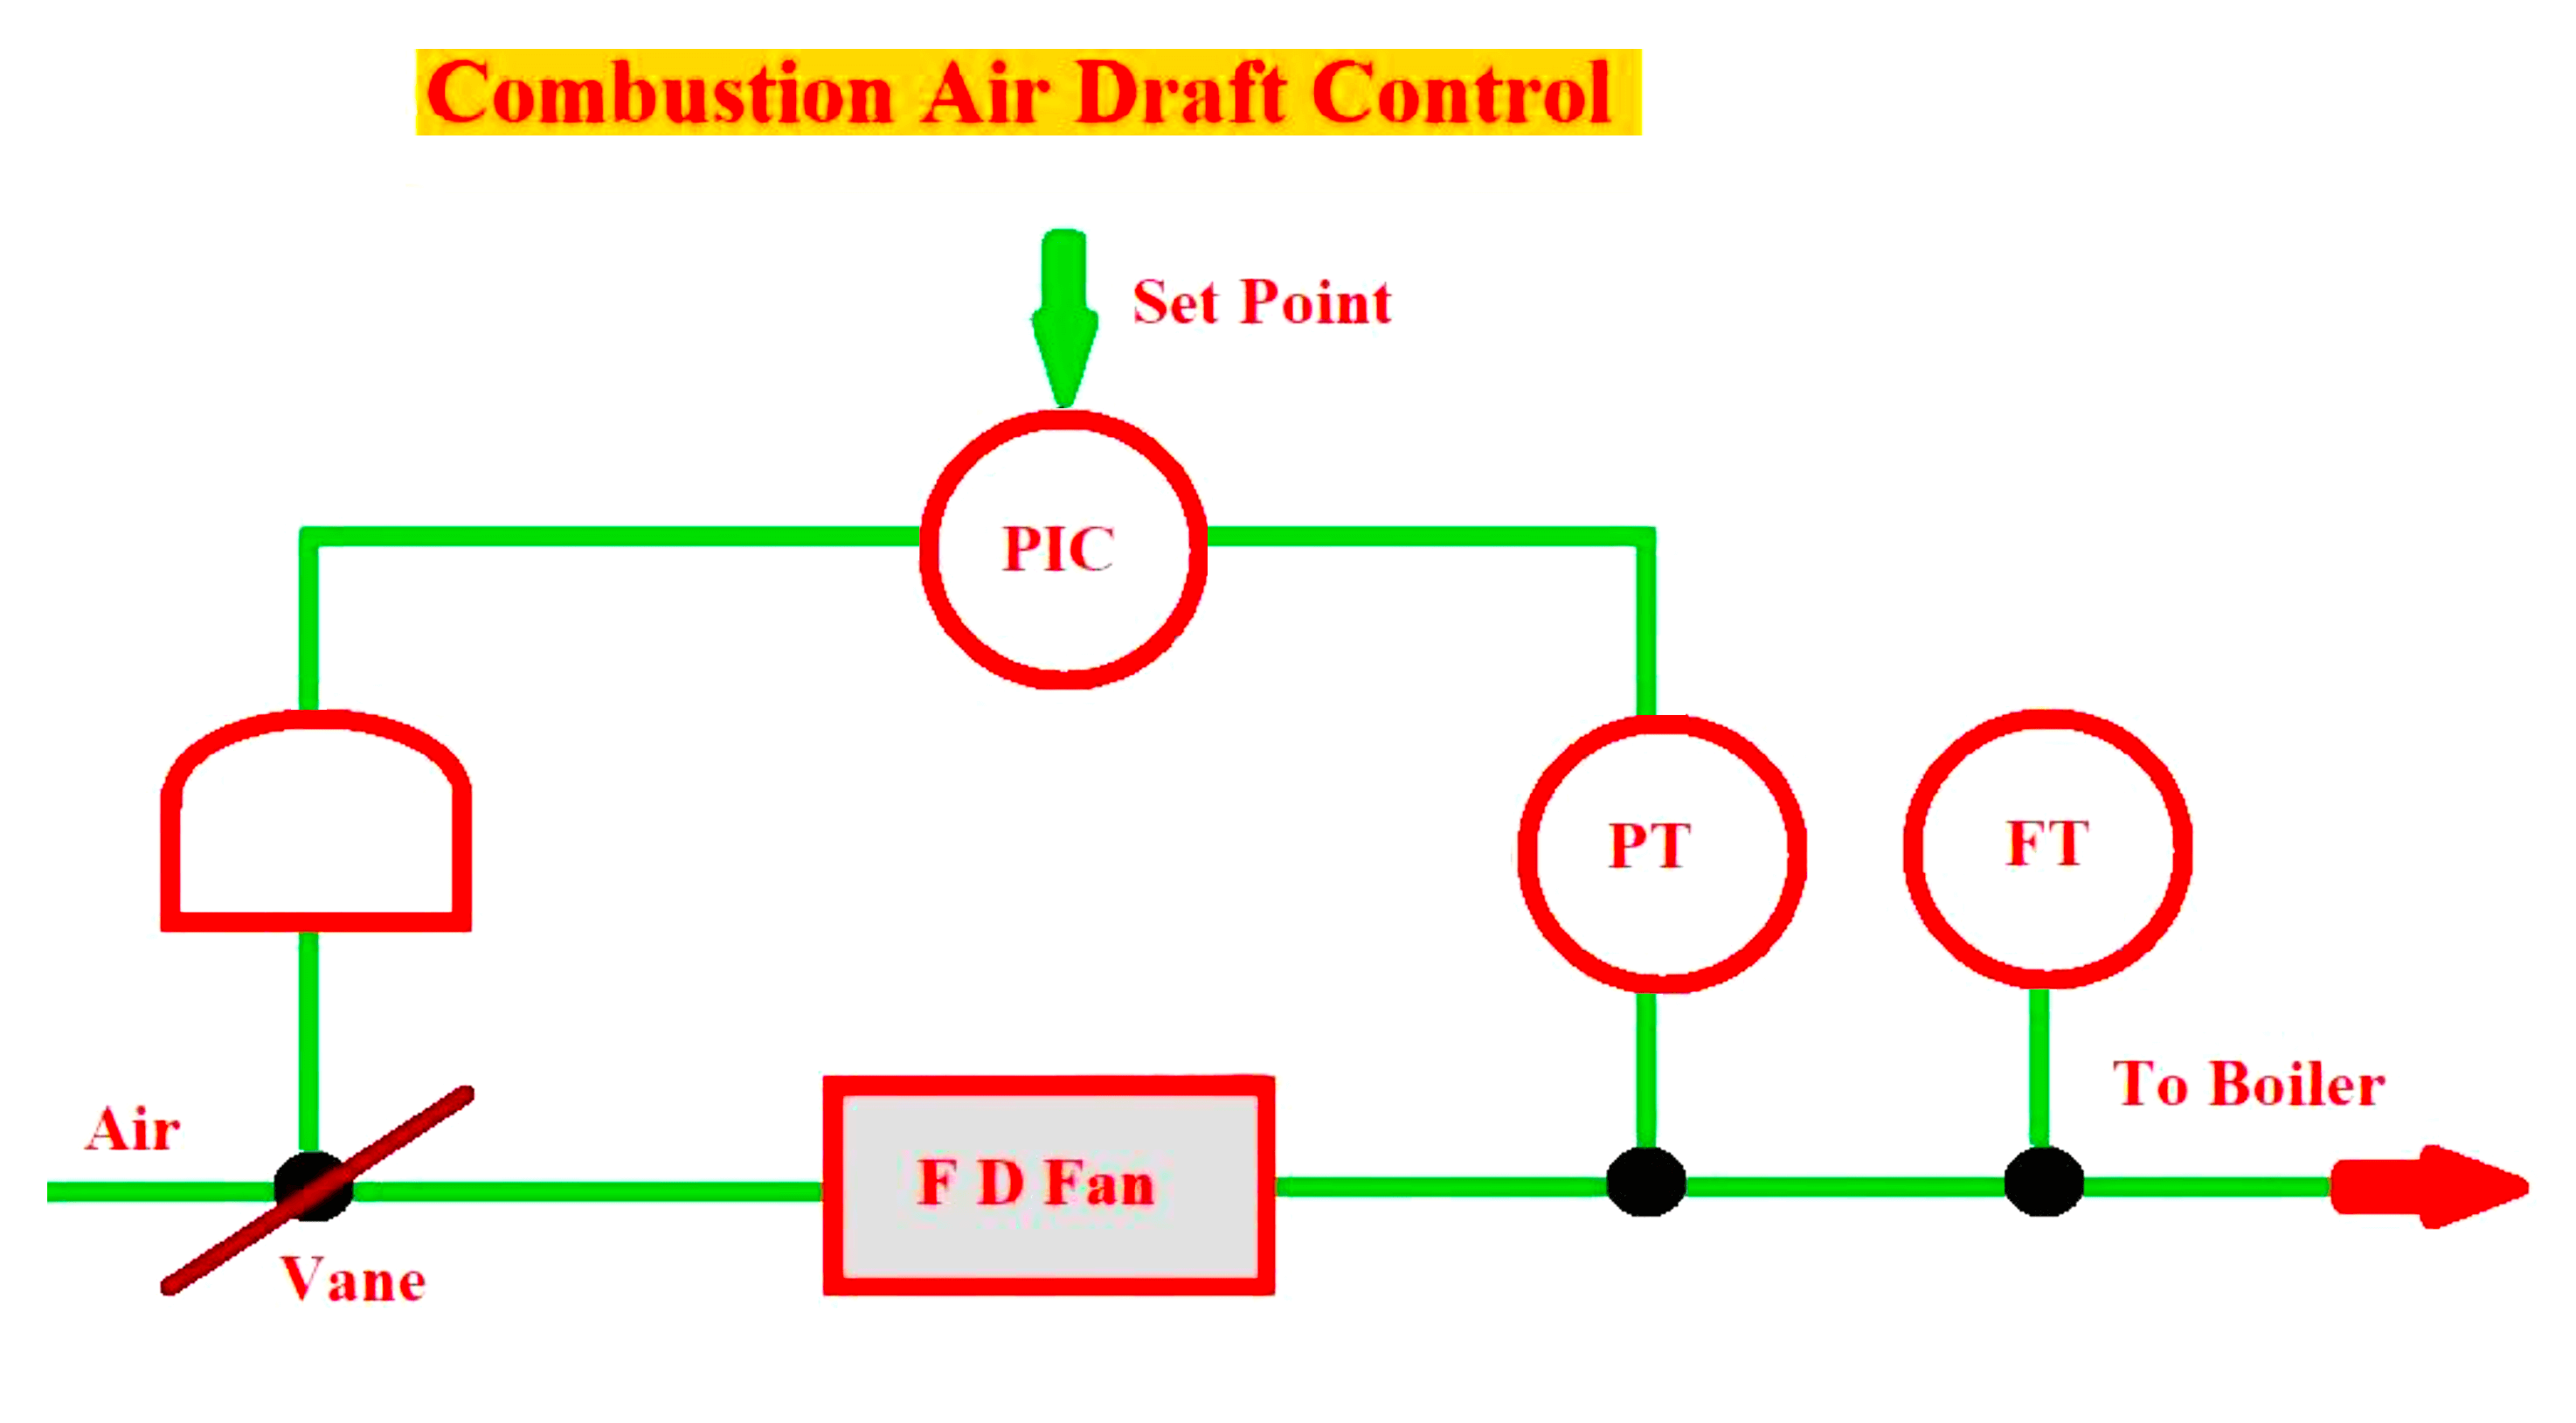 Combustion Air Draft Control